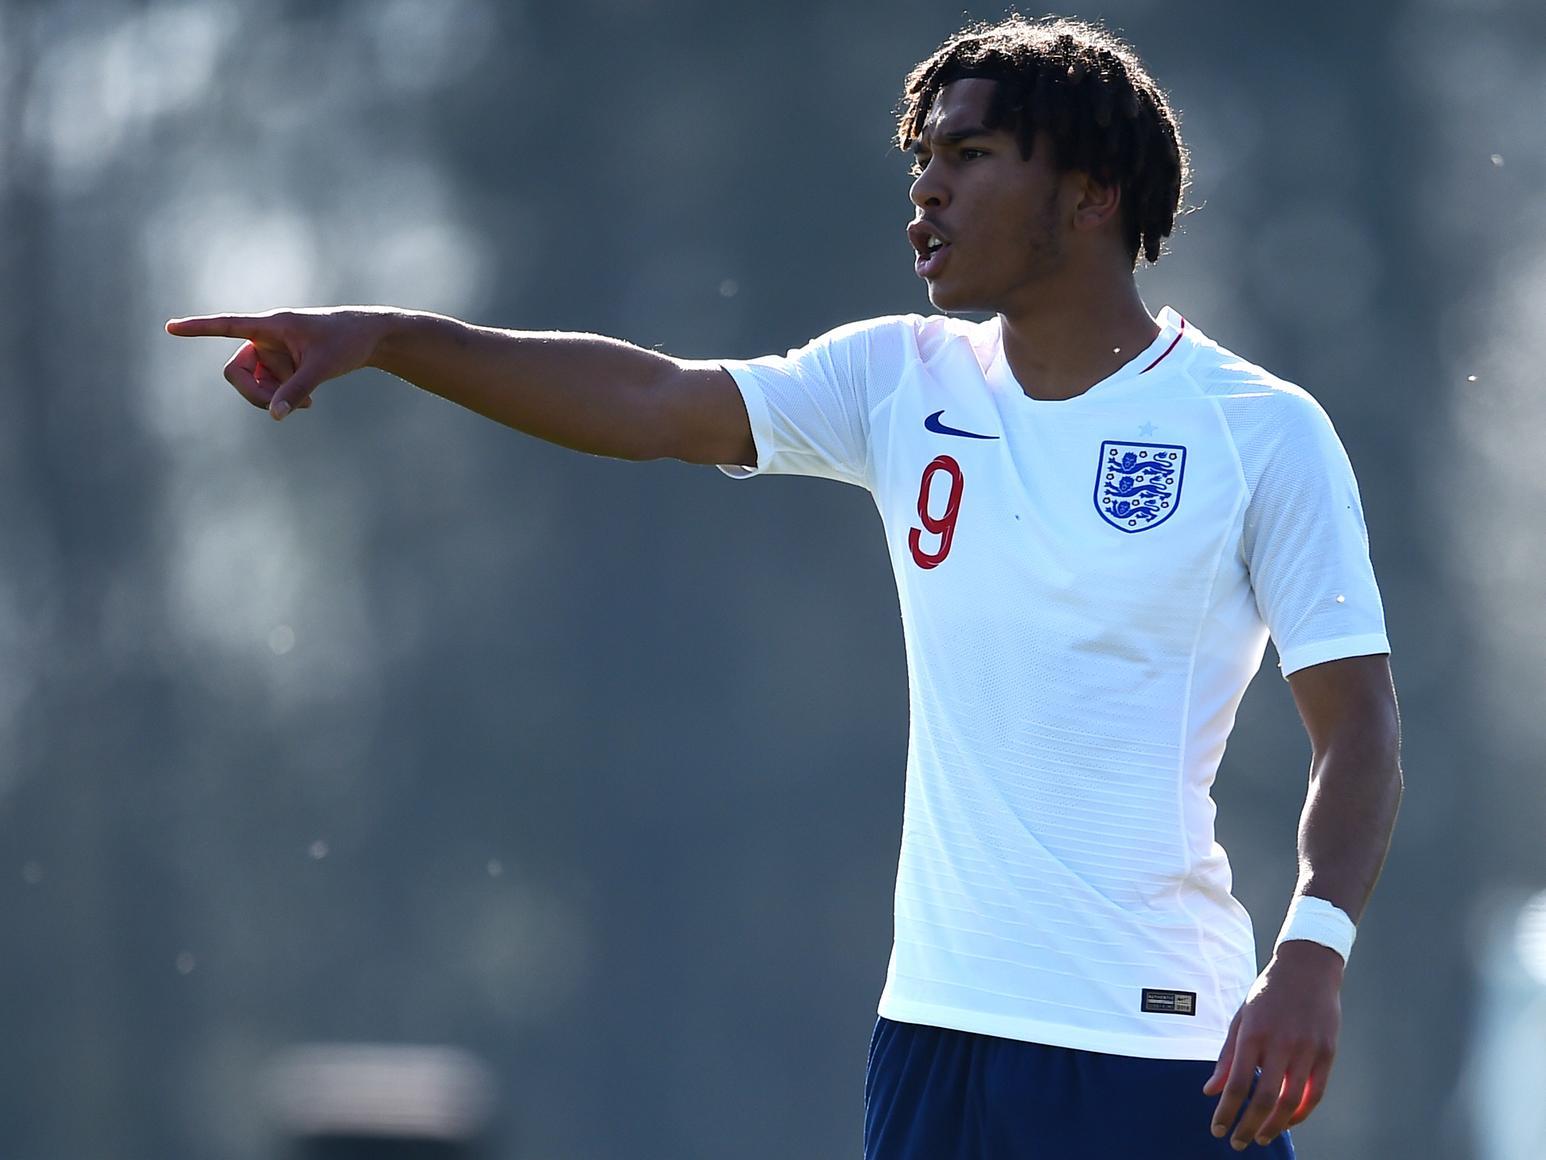 Wolverhampton Wanderers are believed to be ready to go toe-to-toe with Manchester United in the pursuit of Reading youngster Danny Loader, who has excelled at youth level with England. (Birmingham Mail)